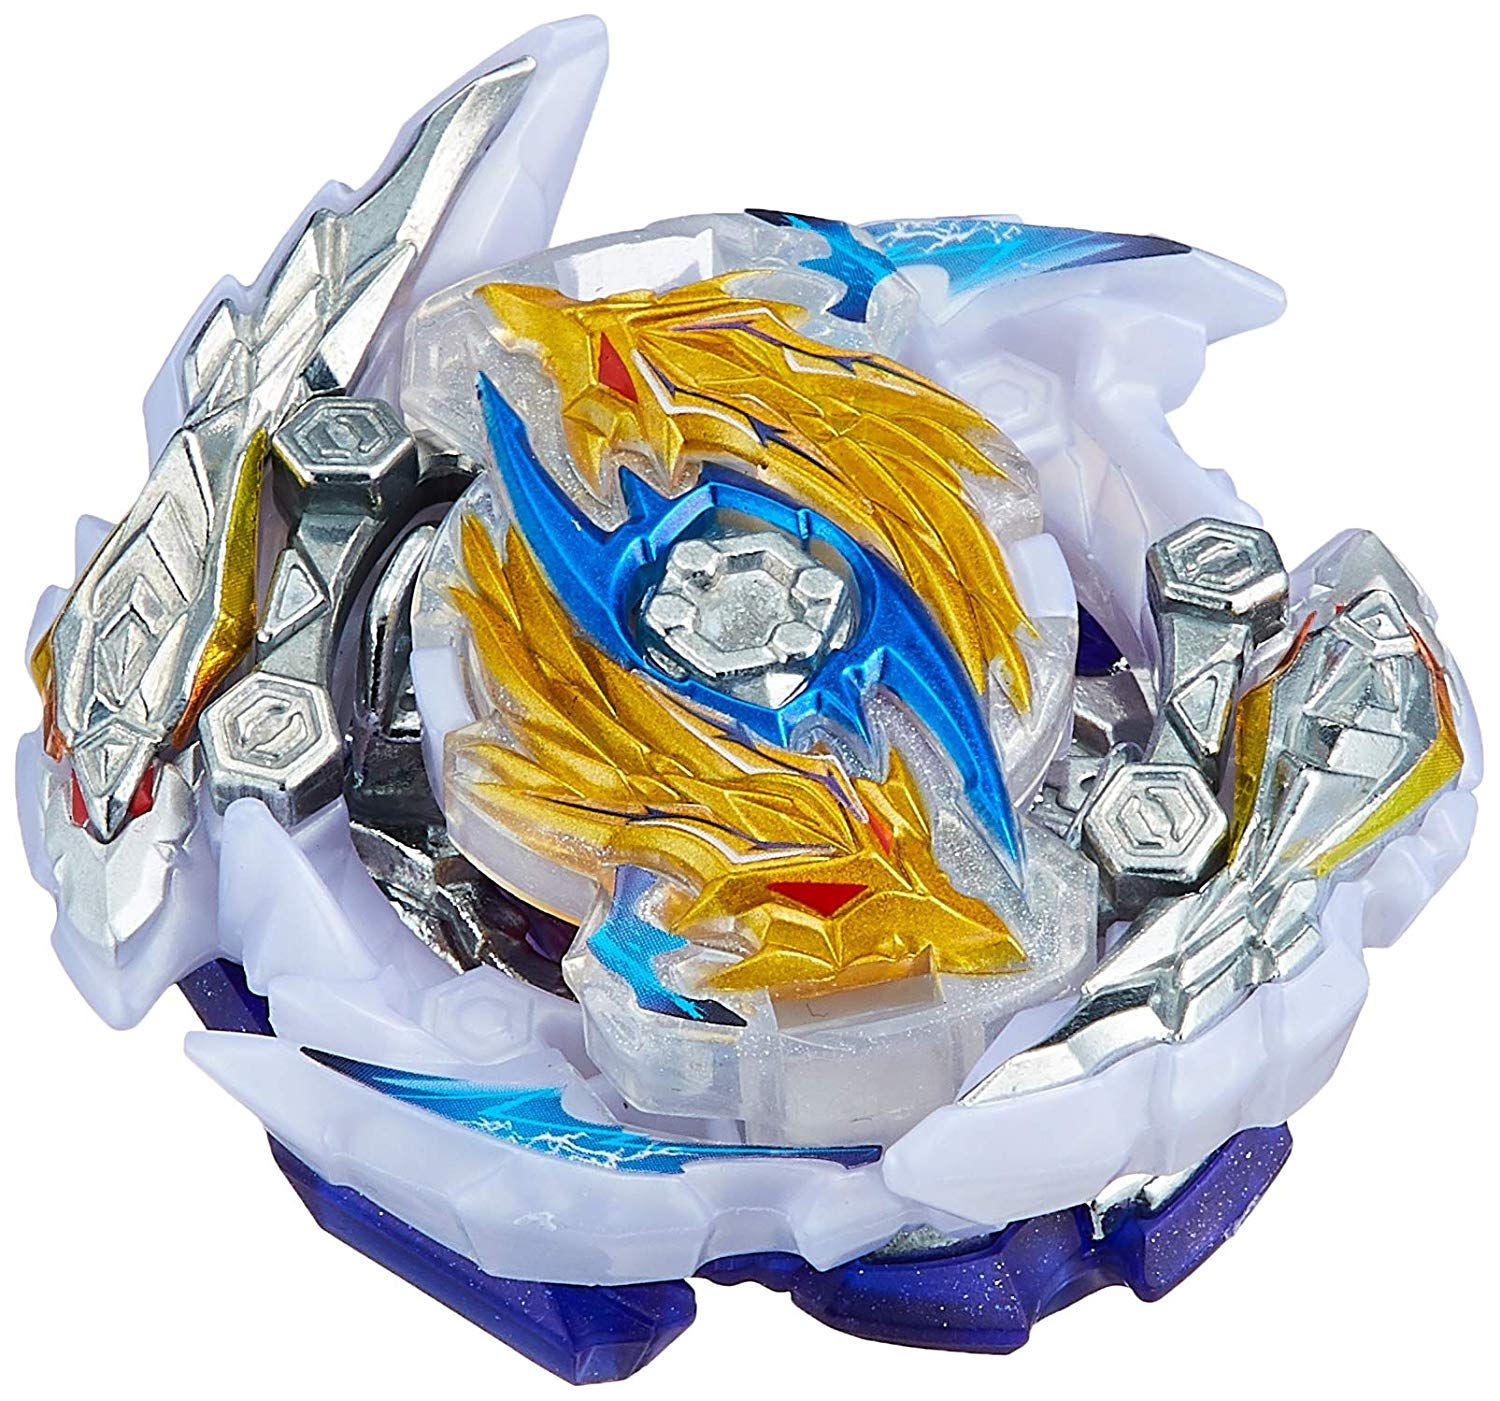 different kinds of beyblades